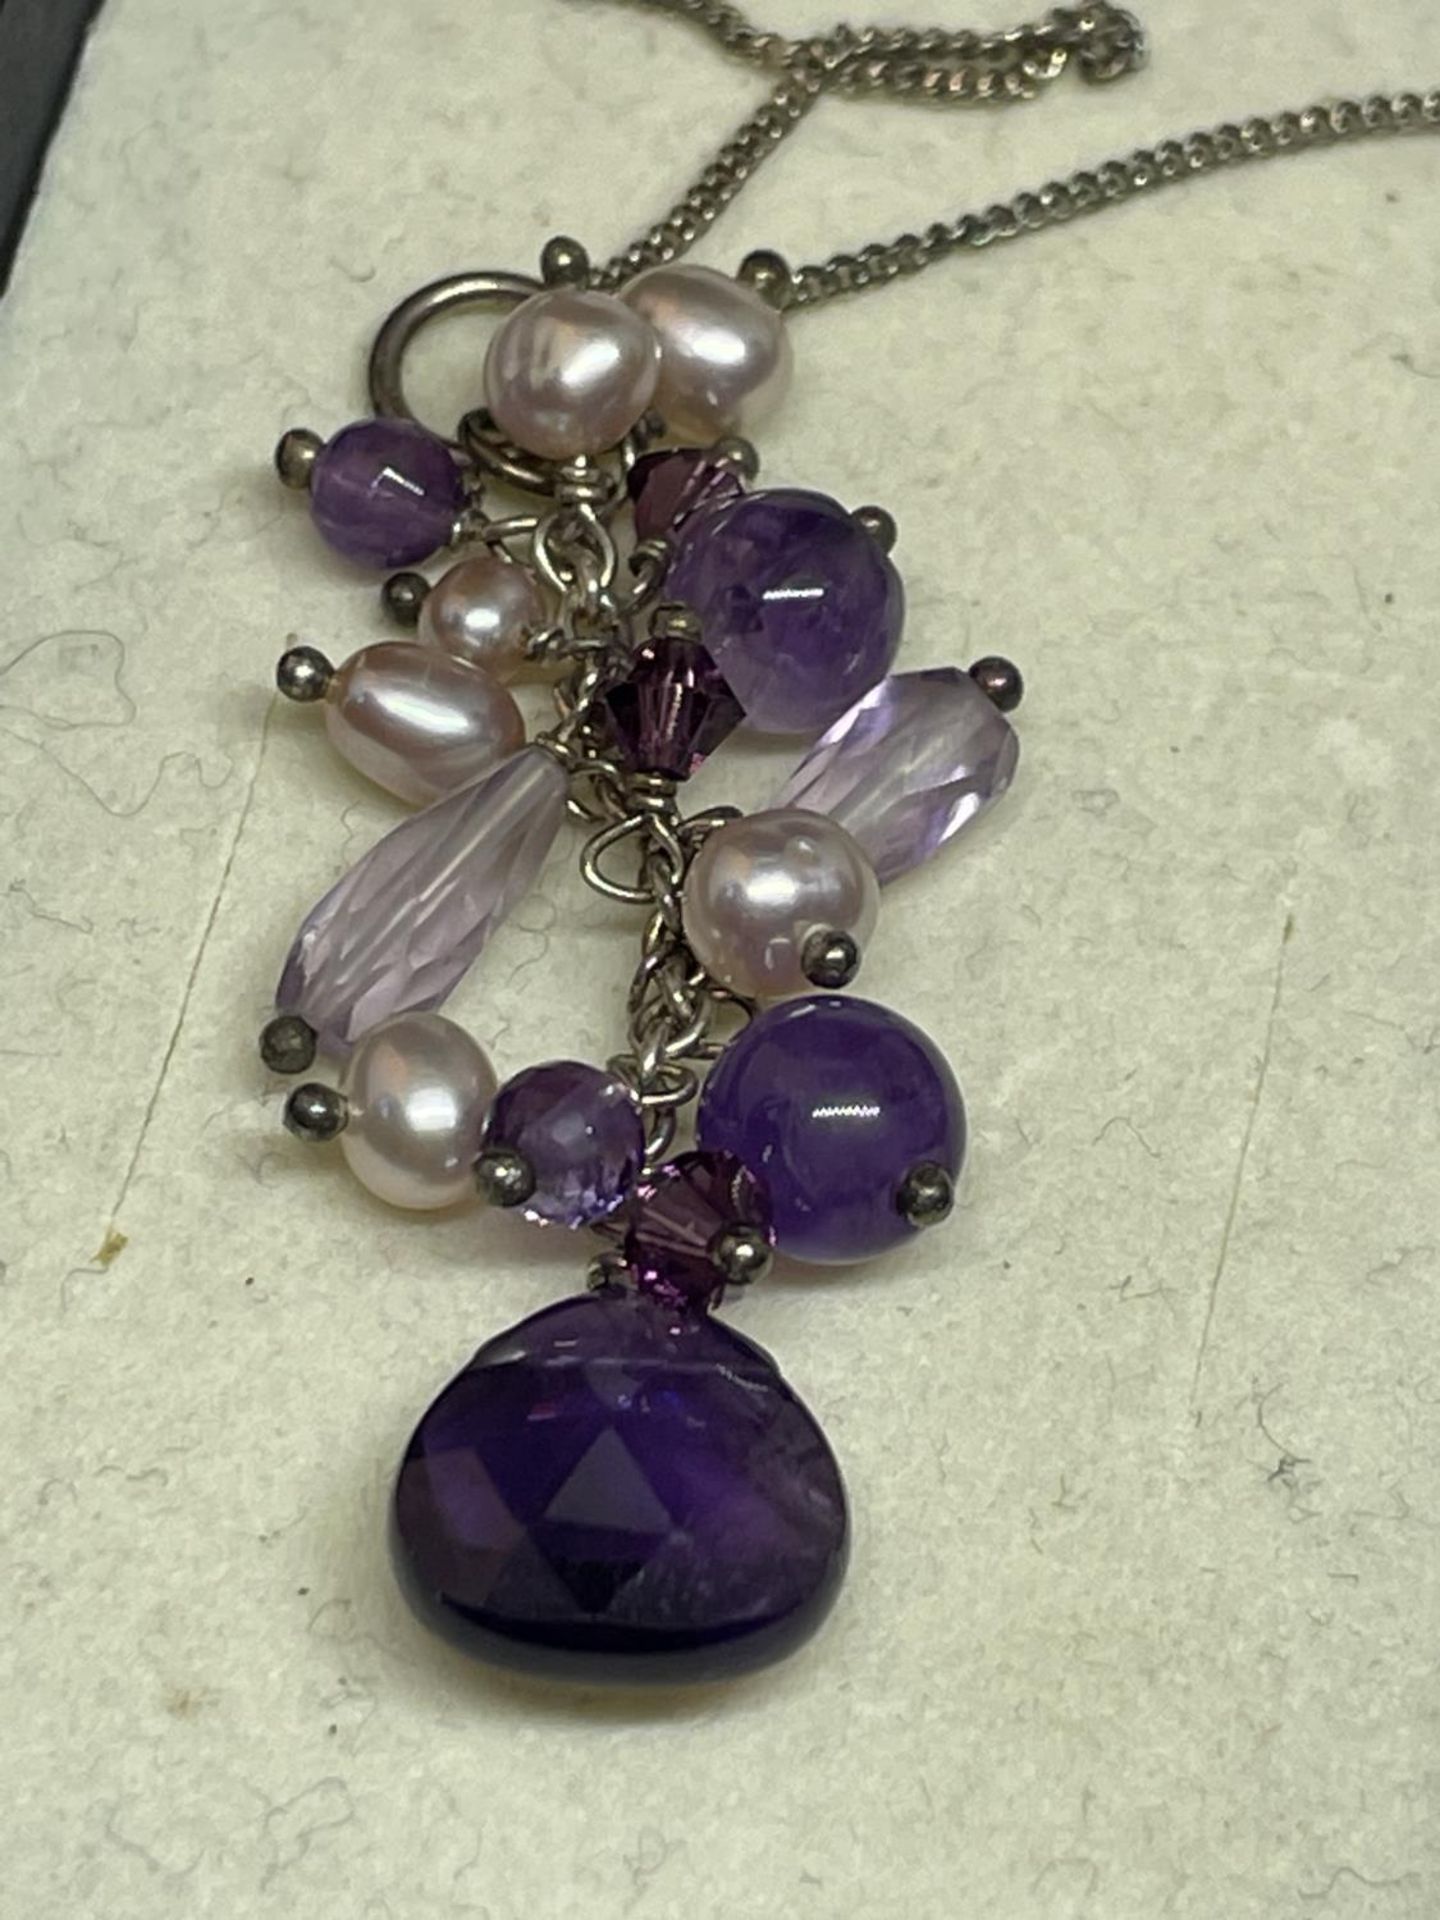 A SILVER AND AMETHYST NECKLACE IN A PRESENTATION BOX - Image 2 of 2